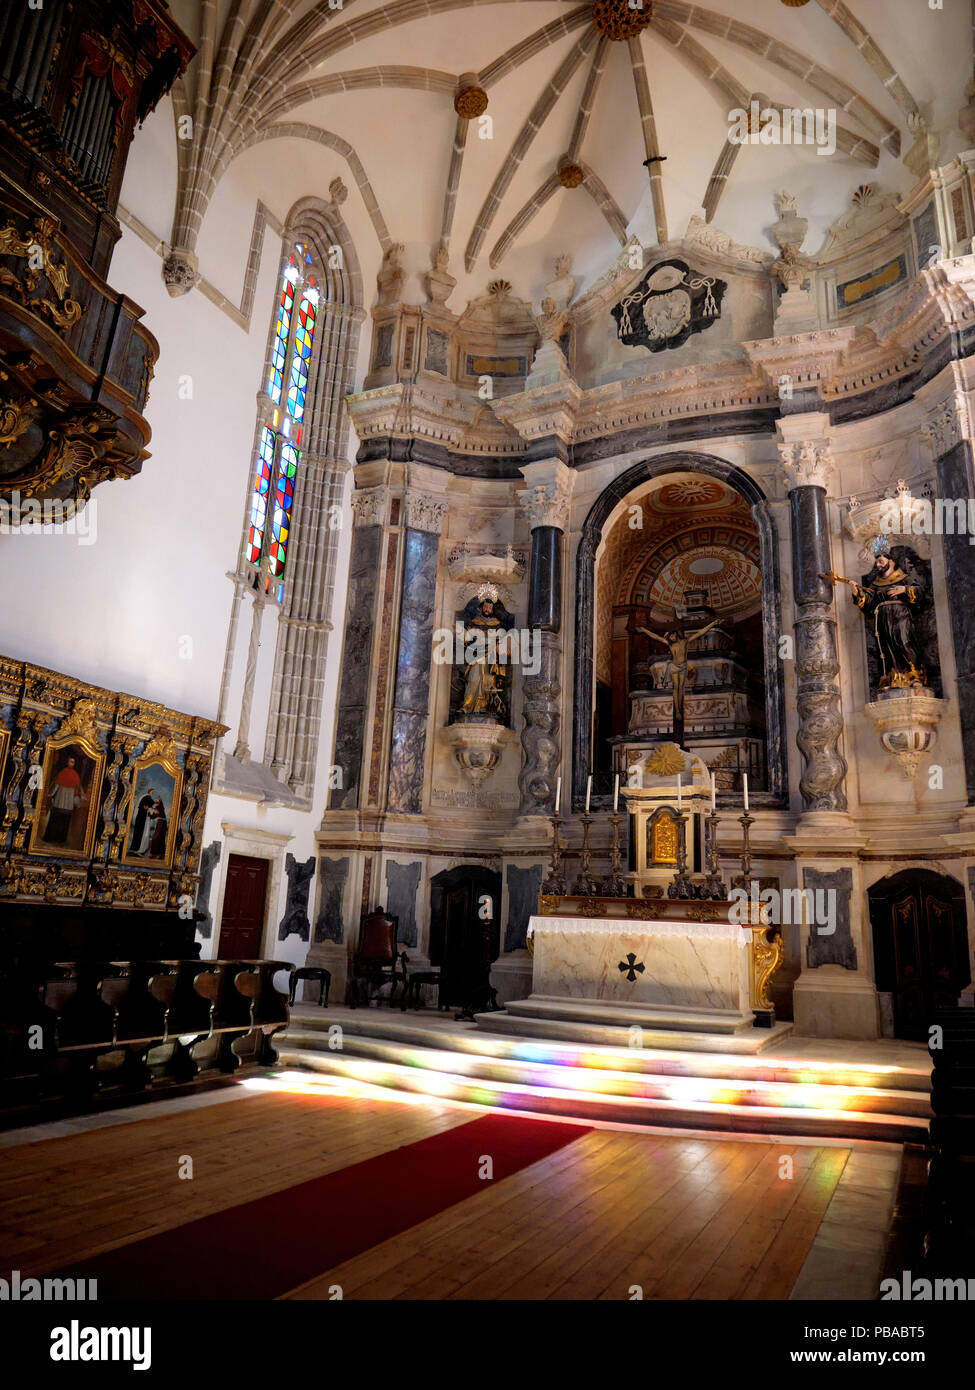 The main interior of the massive 12-century gothic Cathedral of the city of Evora in the Alentejo region of Portugal Stock Photo